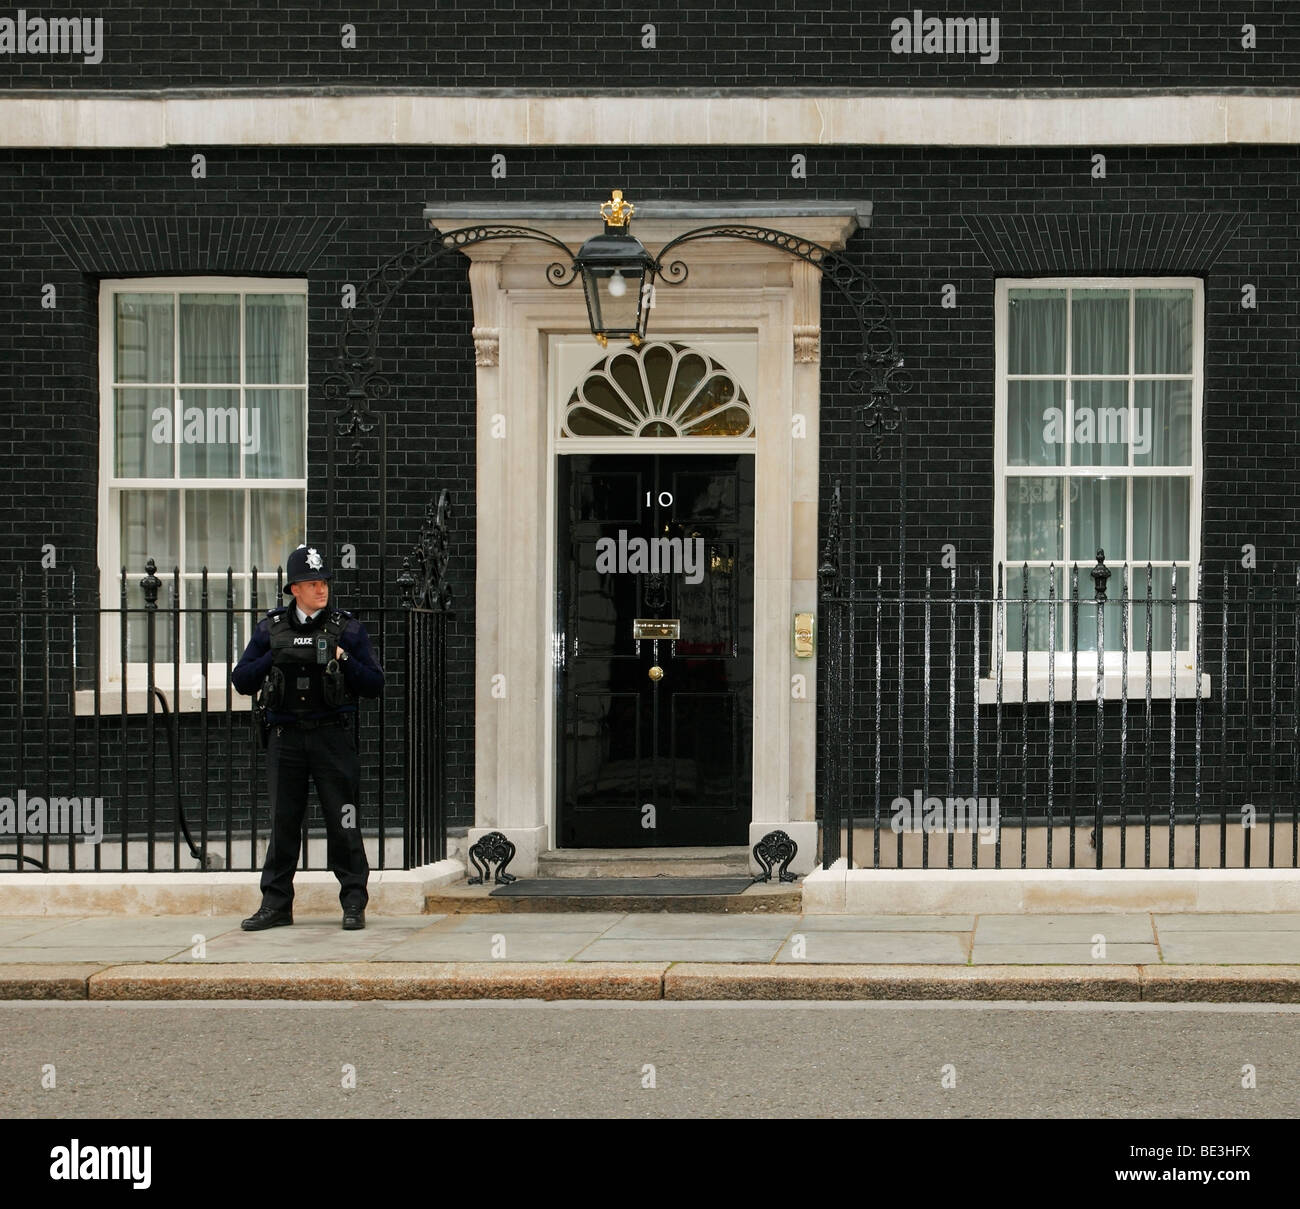 10 Downing Street, Whitehall, Westminster, London, England, UK. Banque D'Images